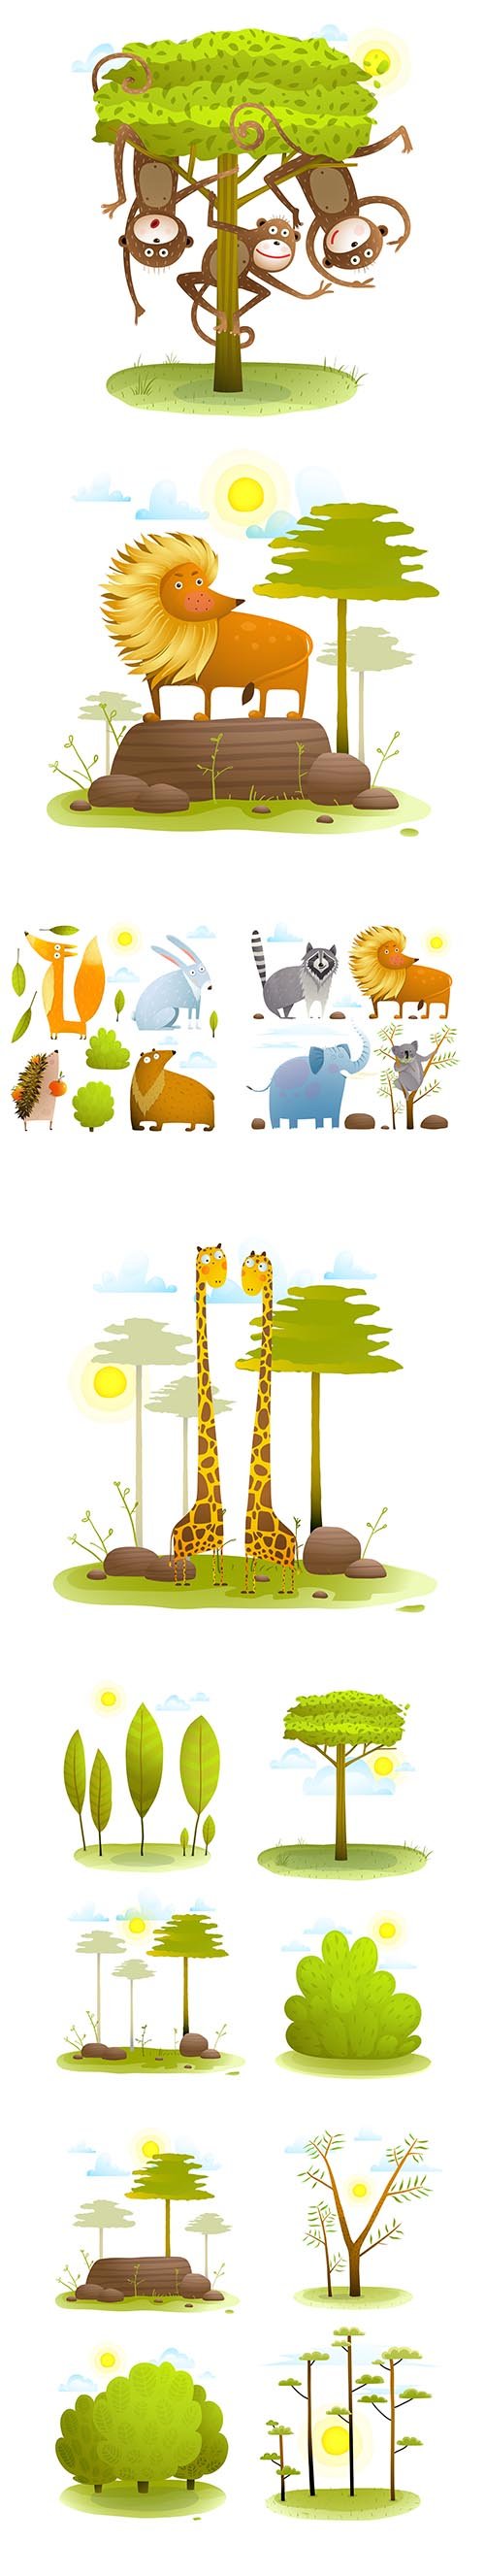 Animal cartoon in wild nature with trees lawn and rock